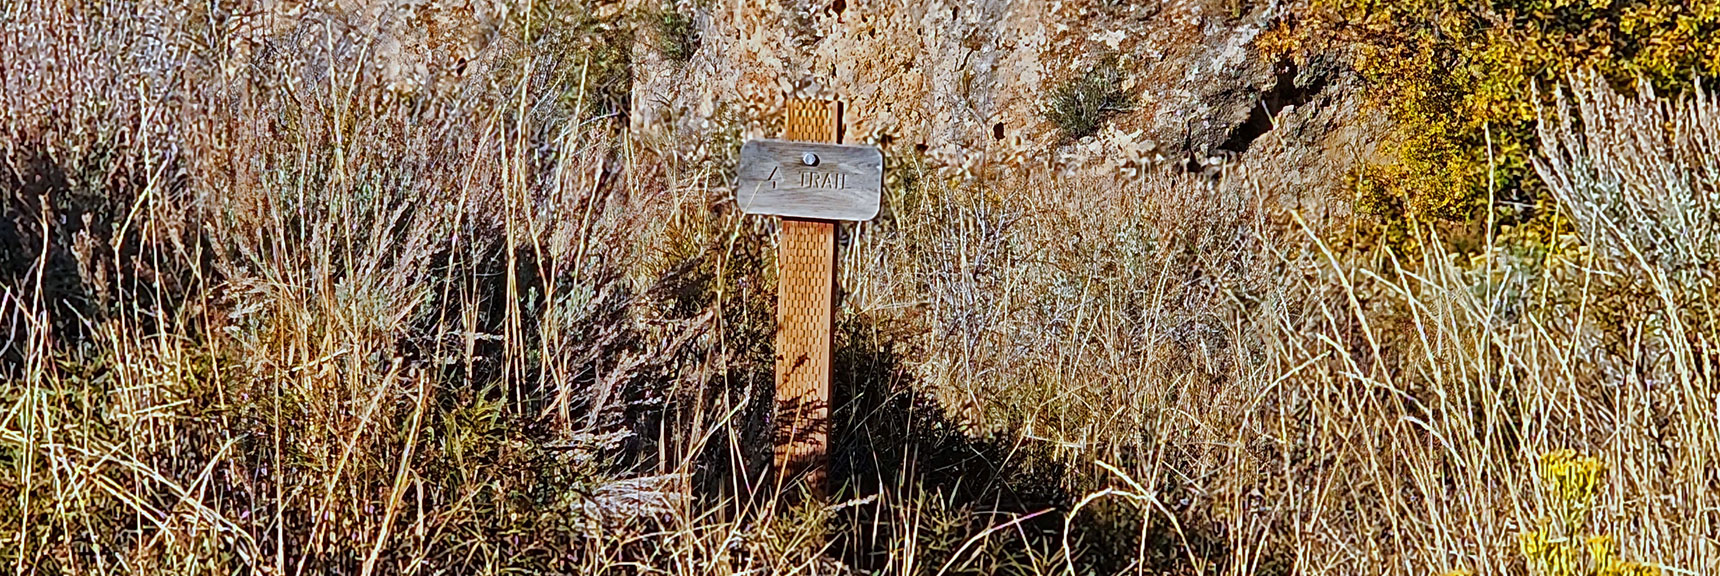 Larger View of "Trail" Sign in Middle of Canyon. Important Marker in Midst of Thick Brush. | Griffith Shadow Loop | Lovell Canyon, Nevada